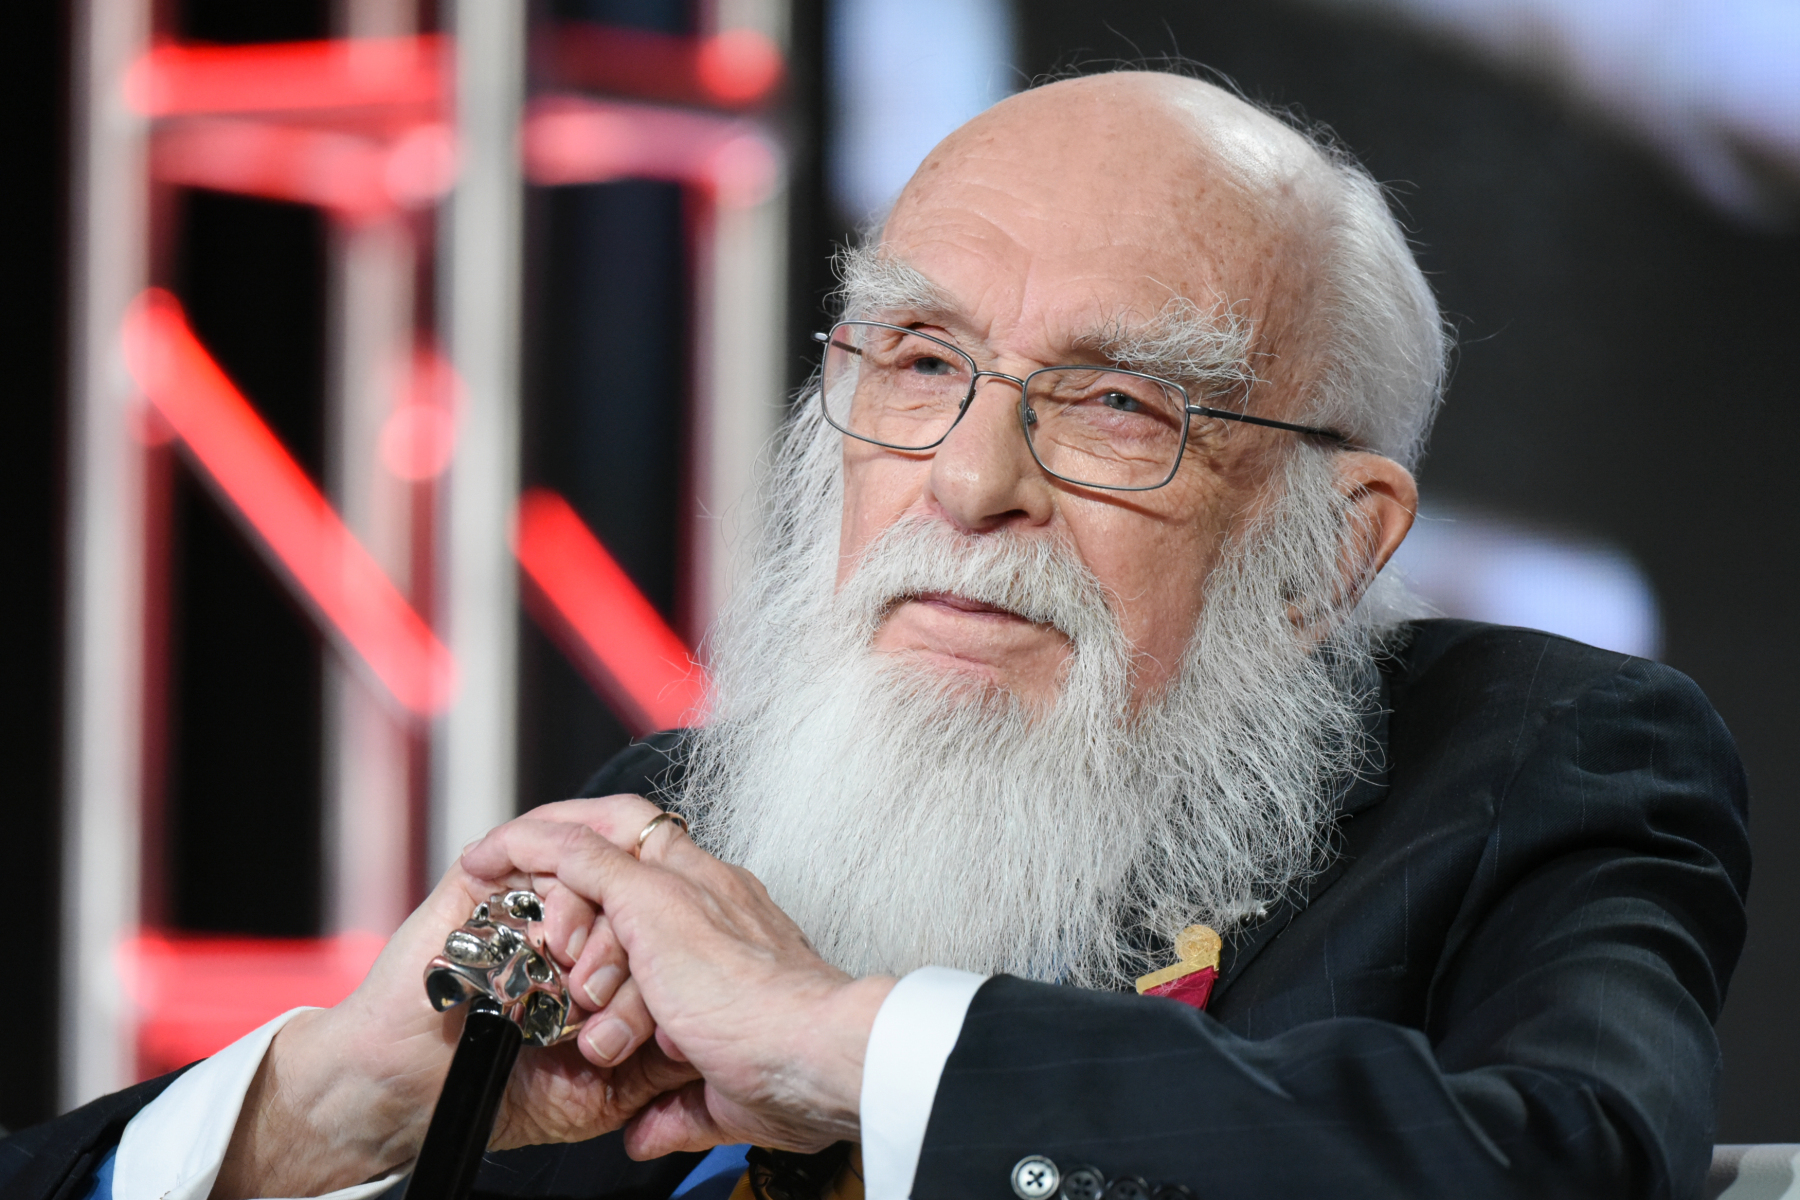 Magician James Randi participates in the "An Honest Liar" panel at the PBS Winter TCA on Monday, Jan.18, 2016, in Pasadena, Calif. (Photo by Richard Shotwell/Invision/AP)